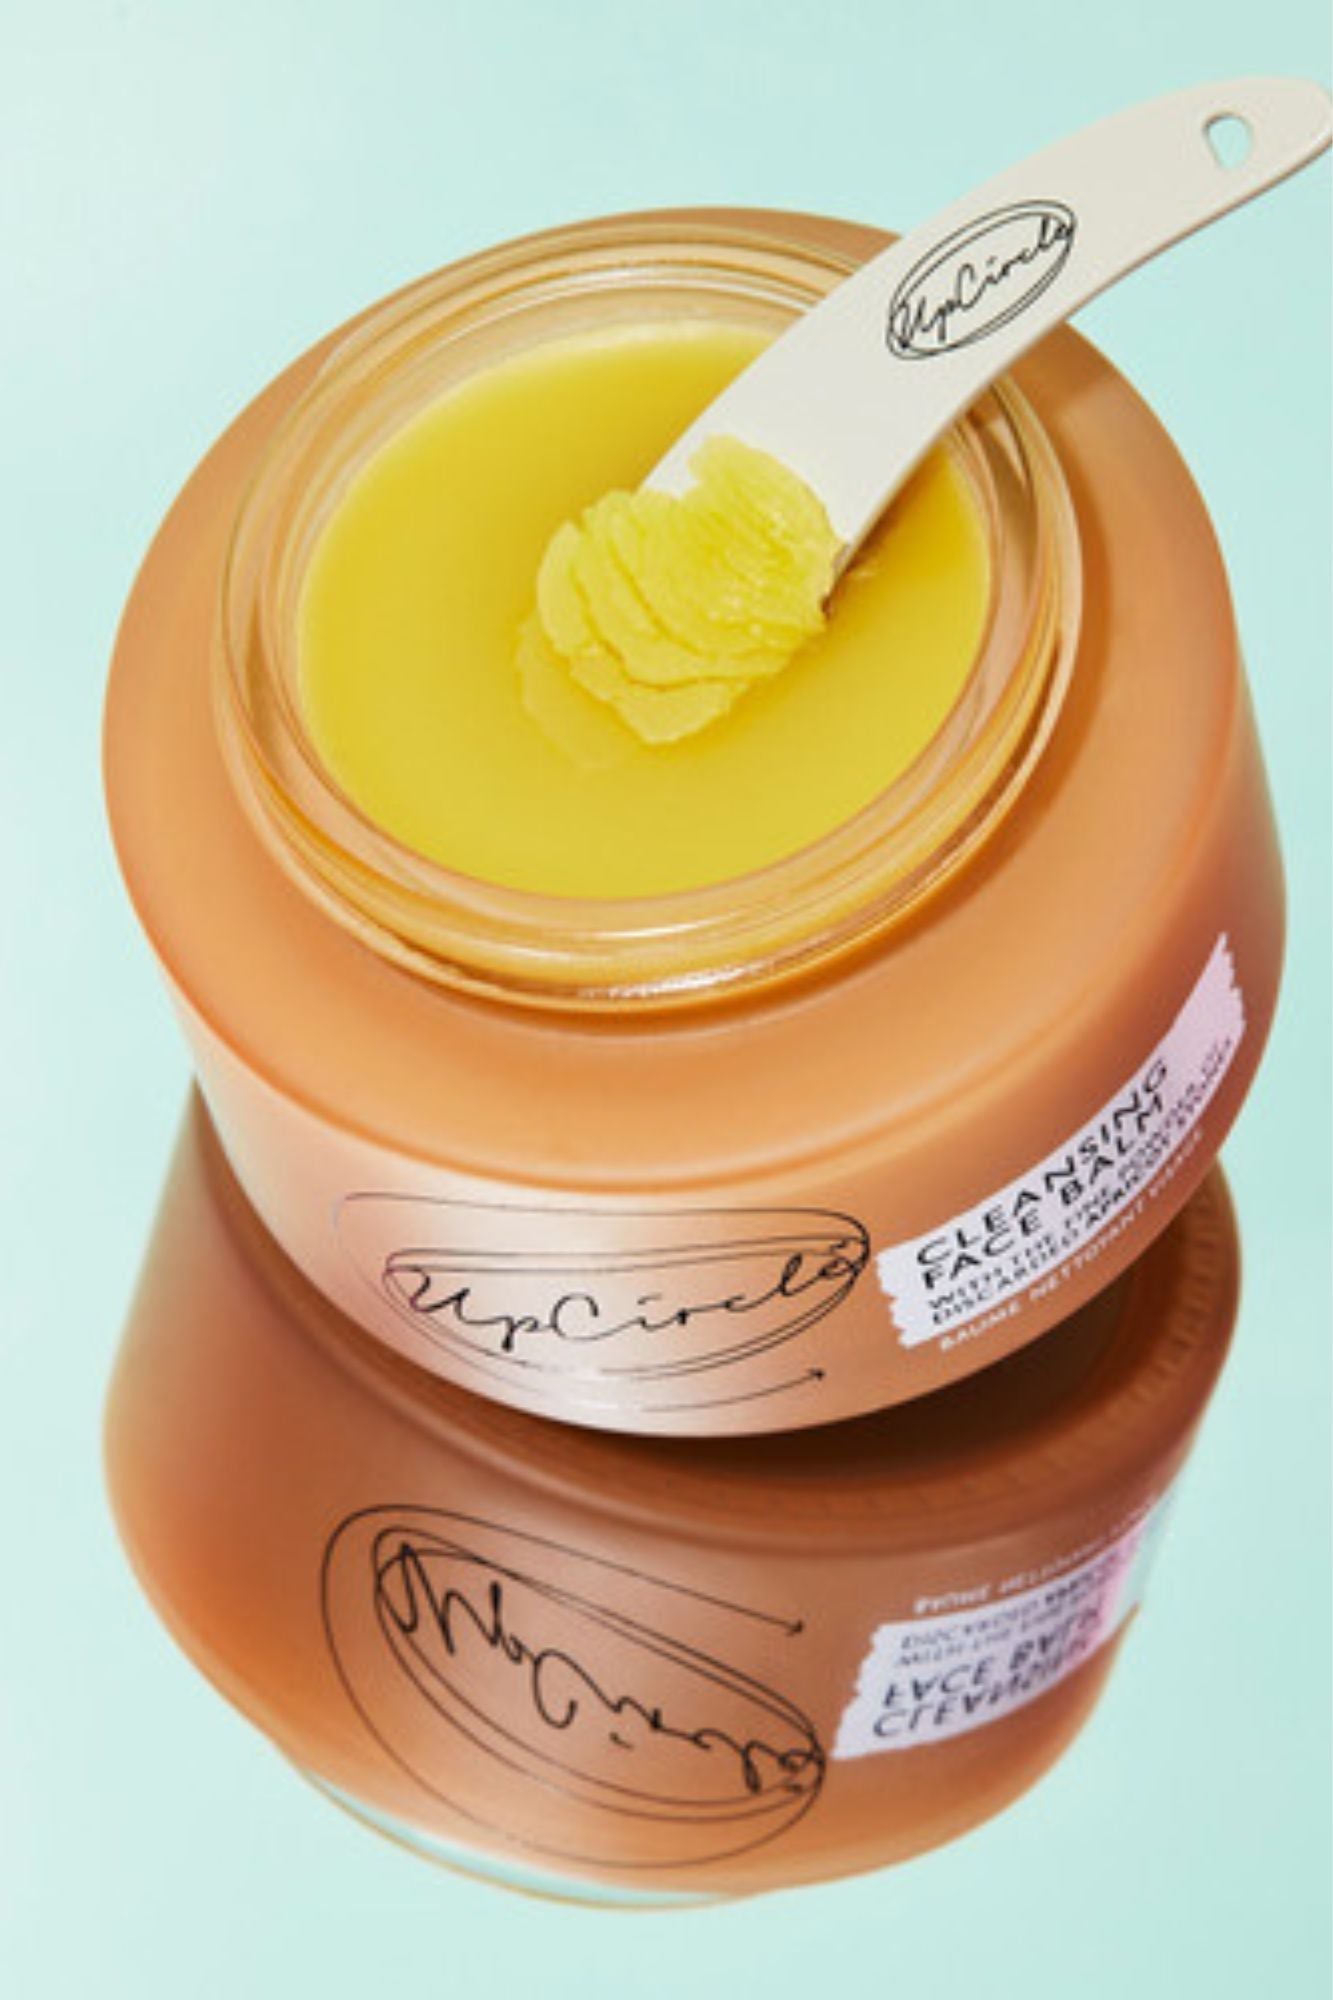 UpCircle Beauty - Cleansing Face Balm with Apricot - 50ml